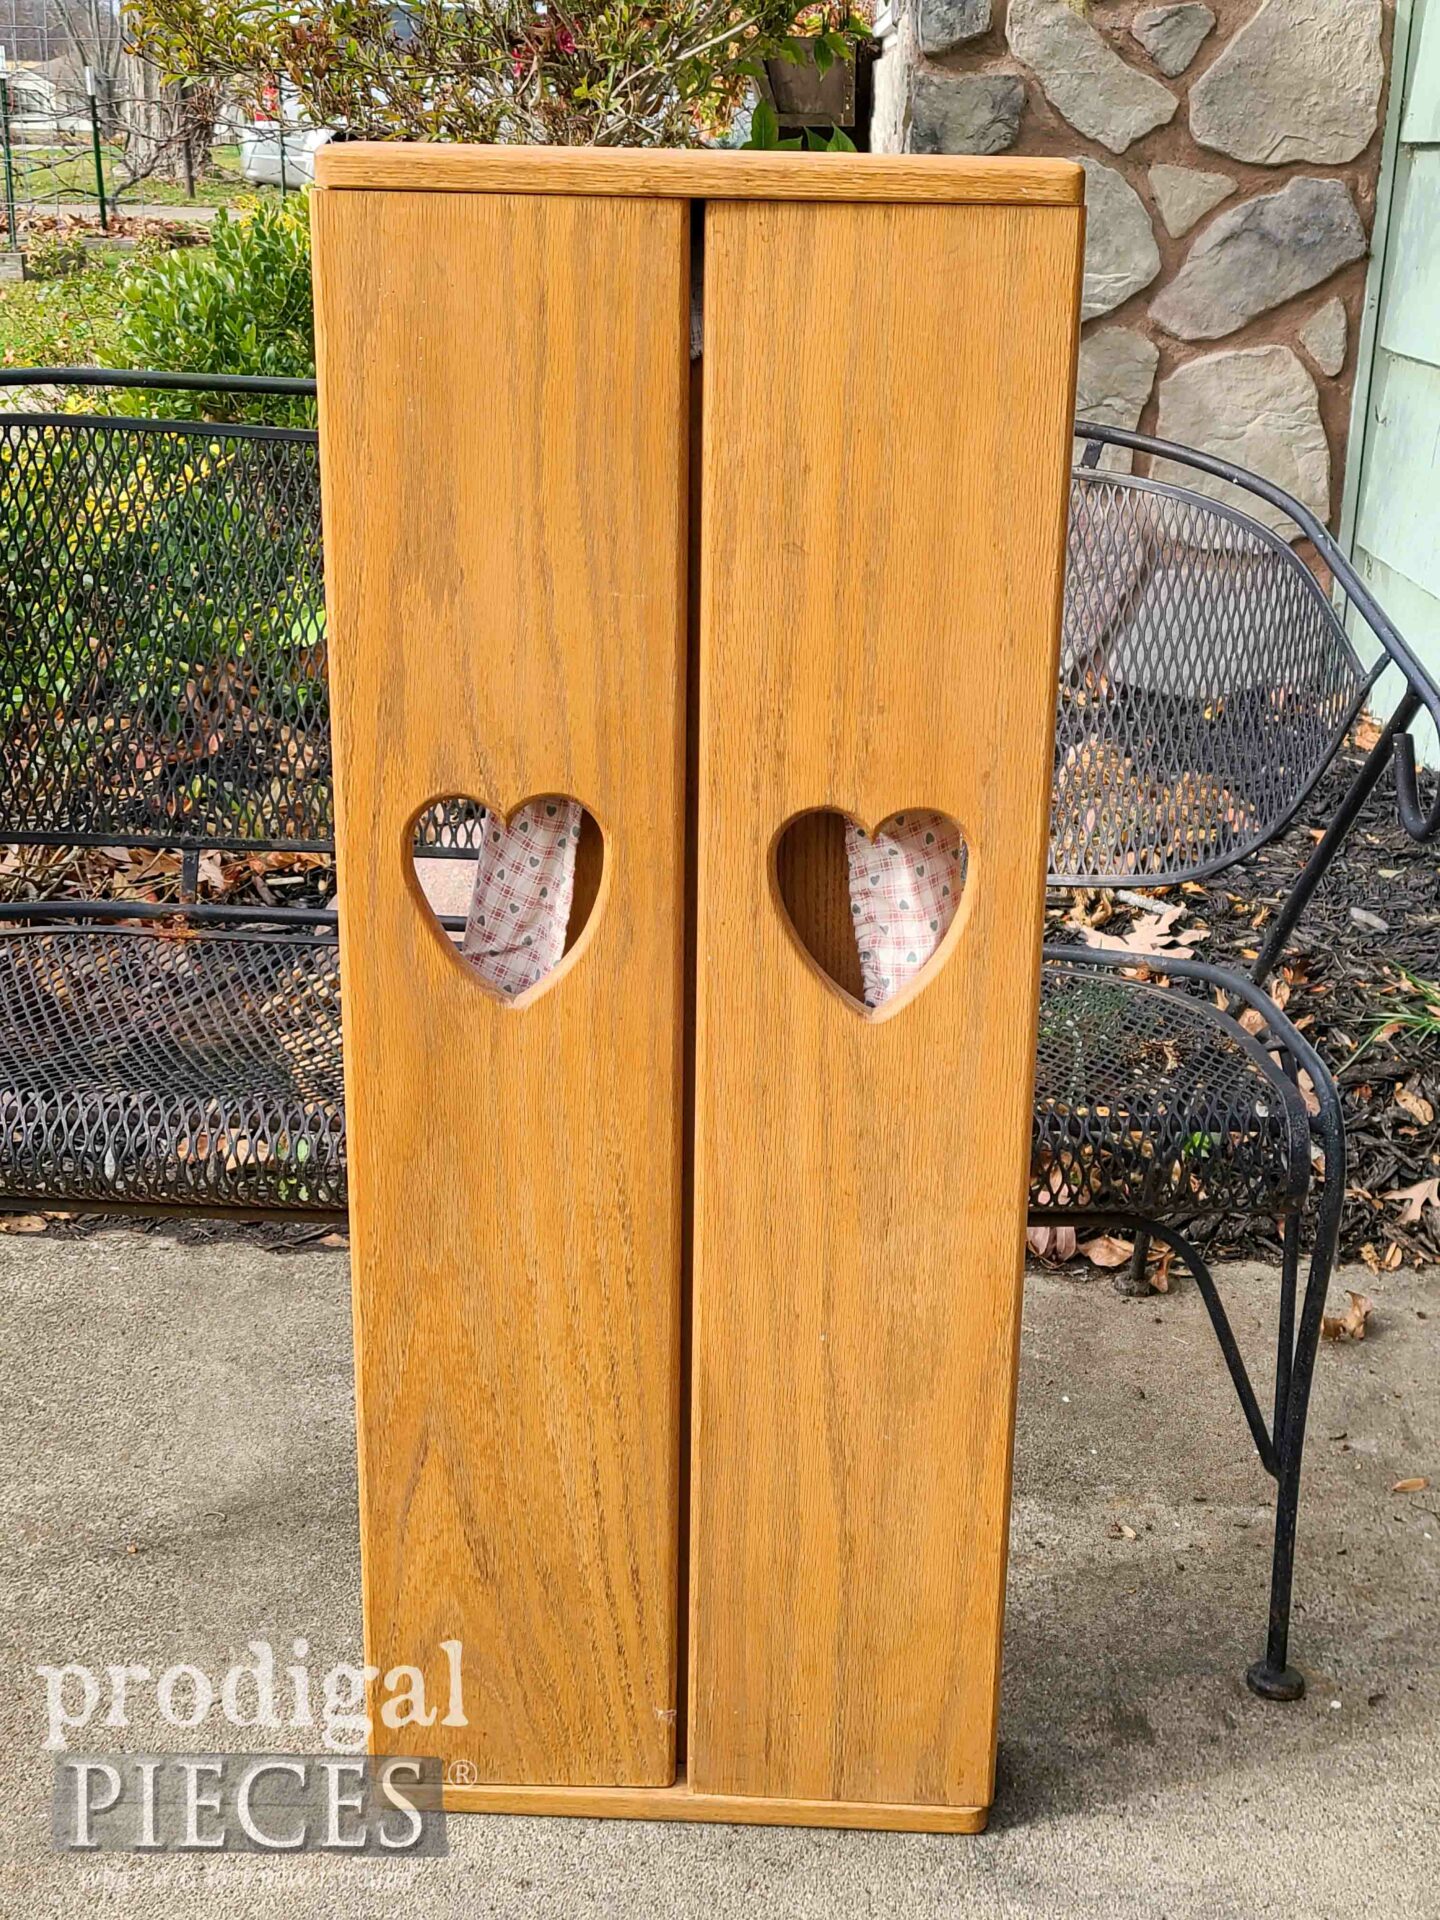 Vintage DIY Ironing Board Cabinet Before | prodigalpieces.com #prodigalpieces